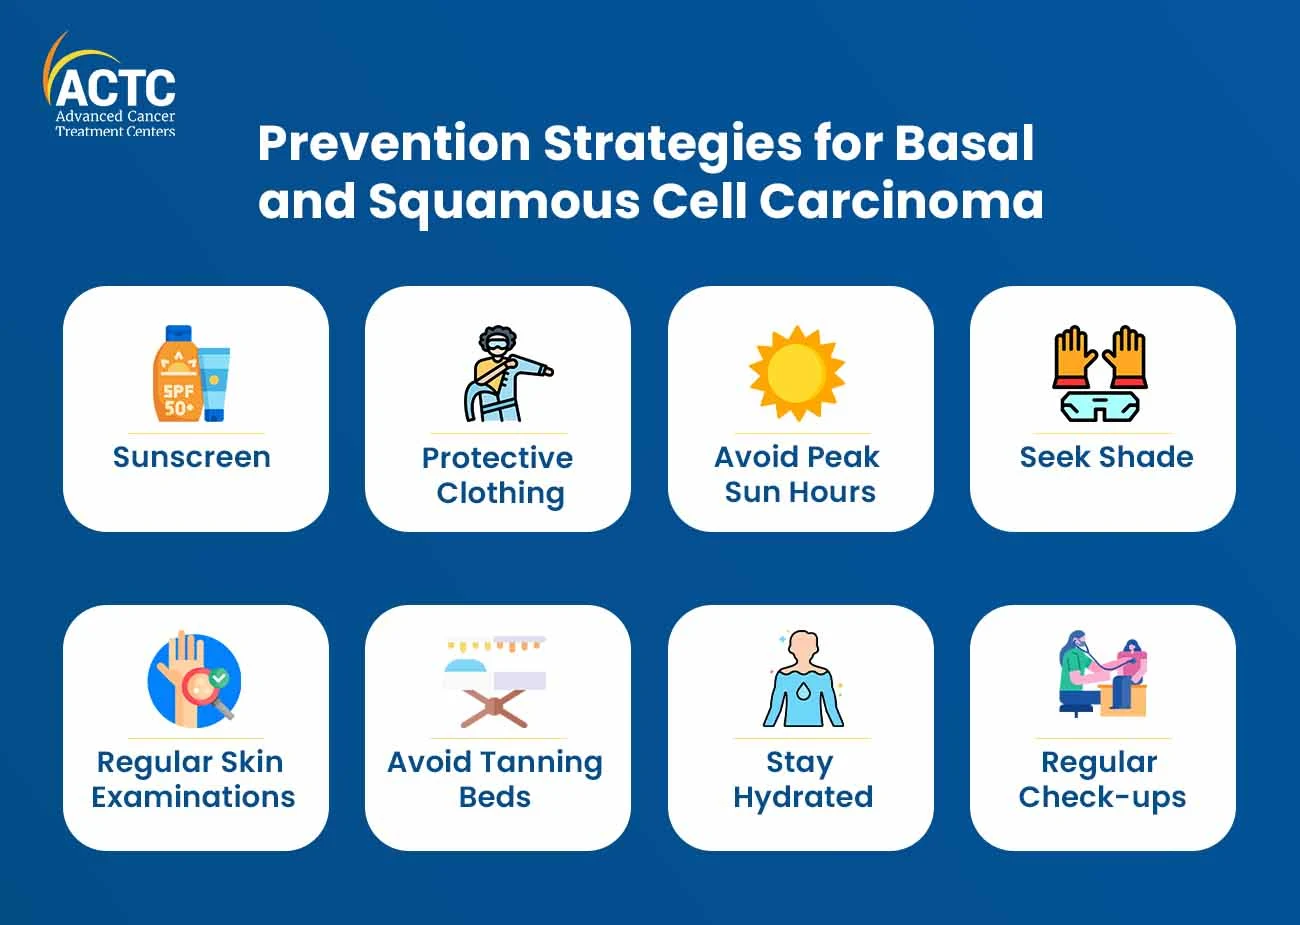 Prevention Strategies for Basal and Squamous Cell Carcinoma